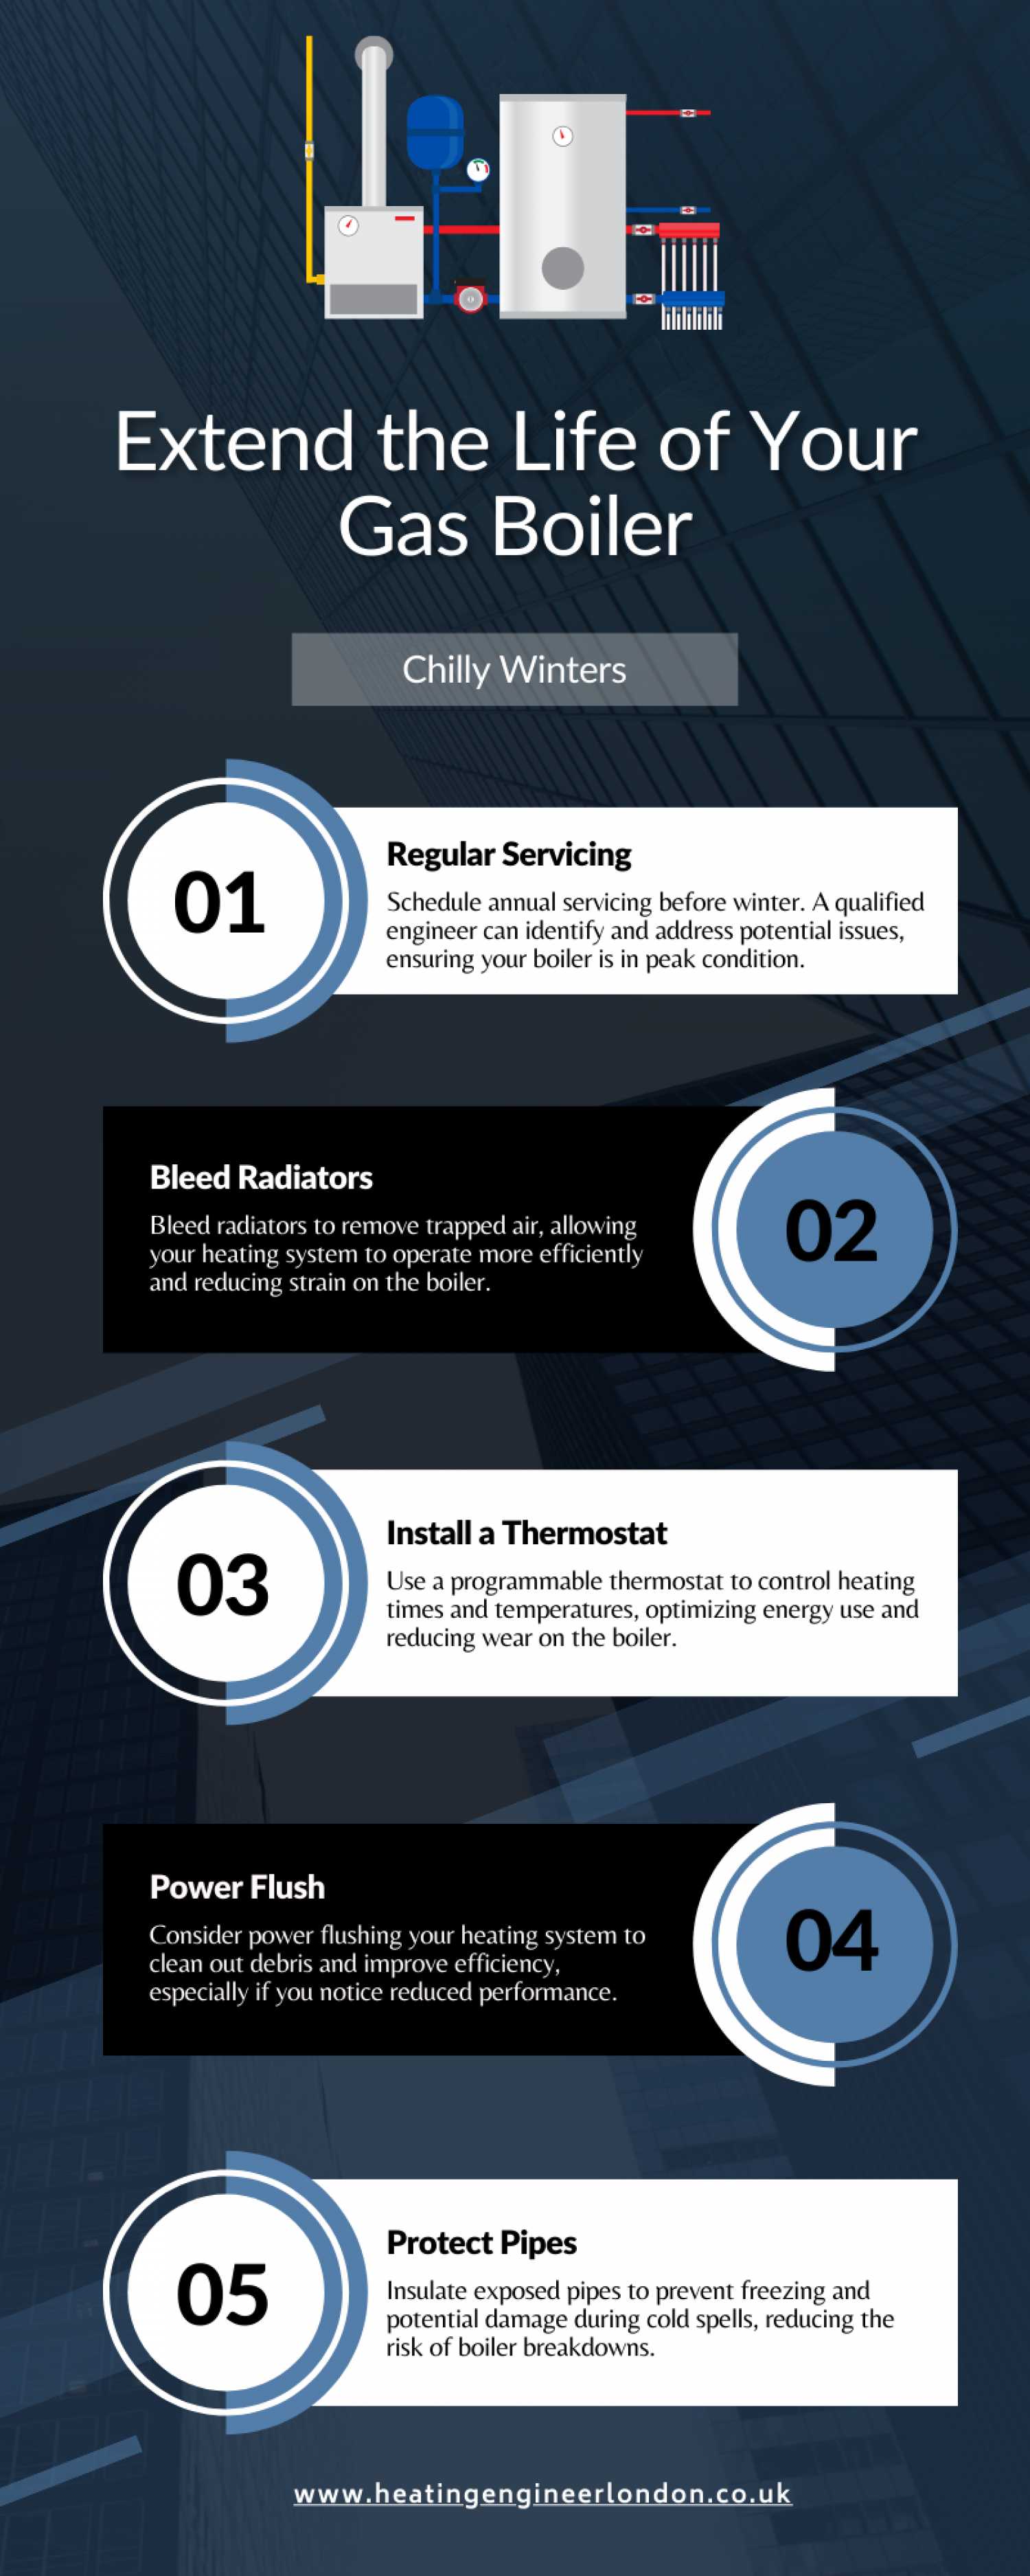 How to Extend the Life of Your Gas Boiler in Chilly Winters Infographic